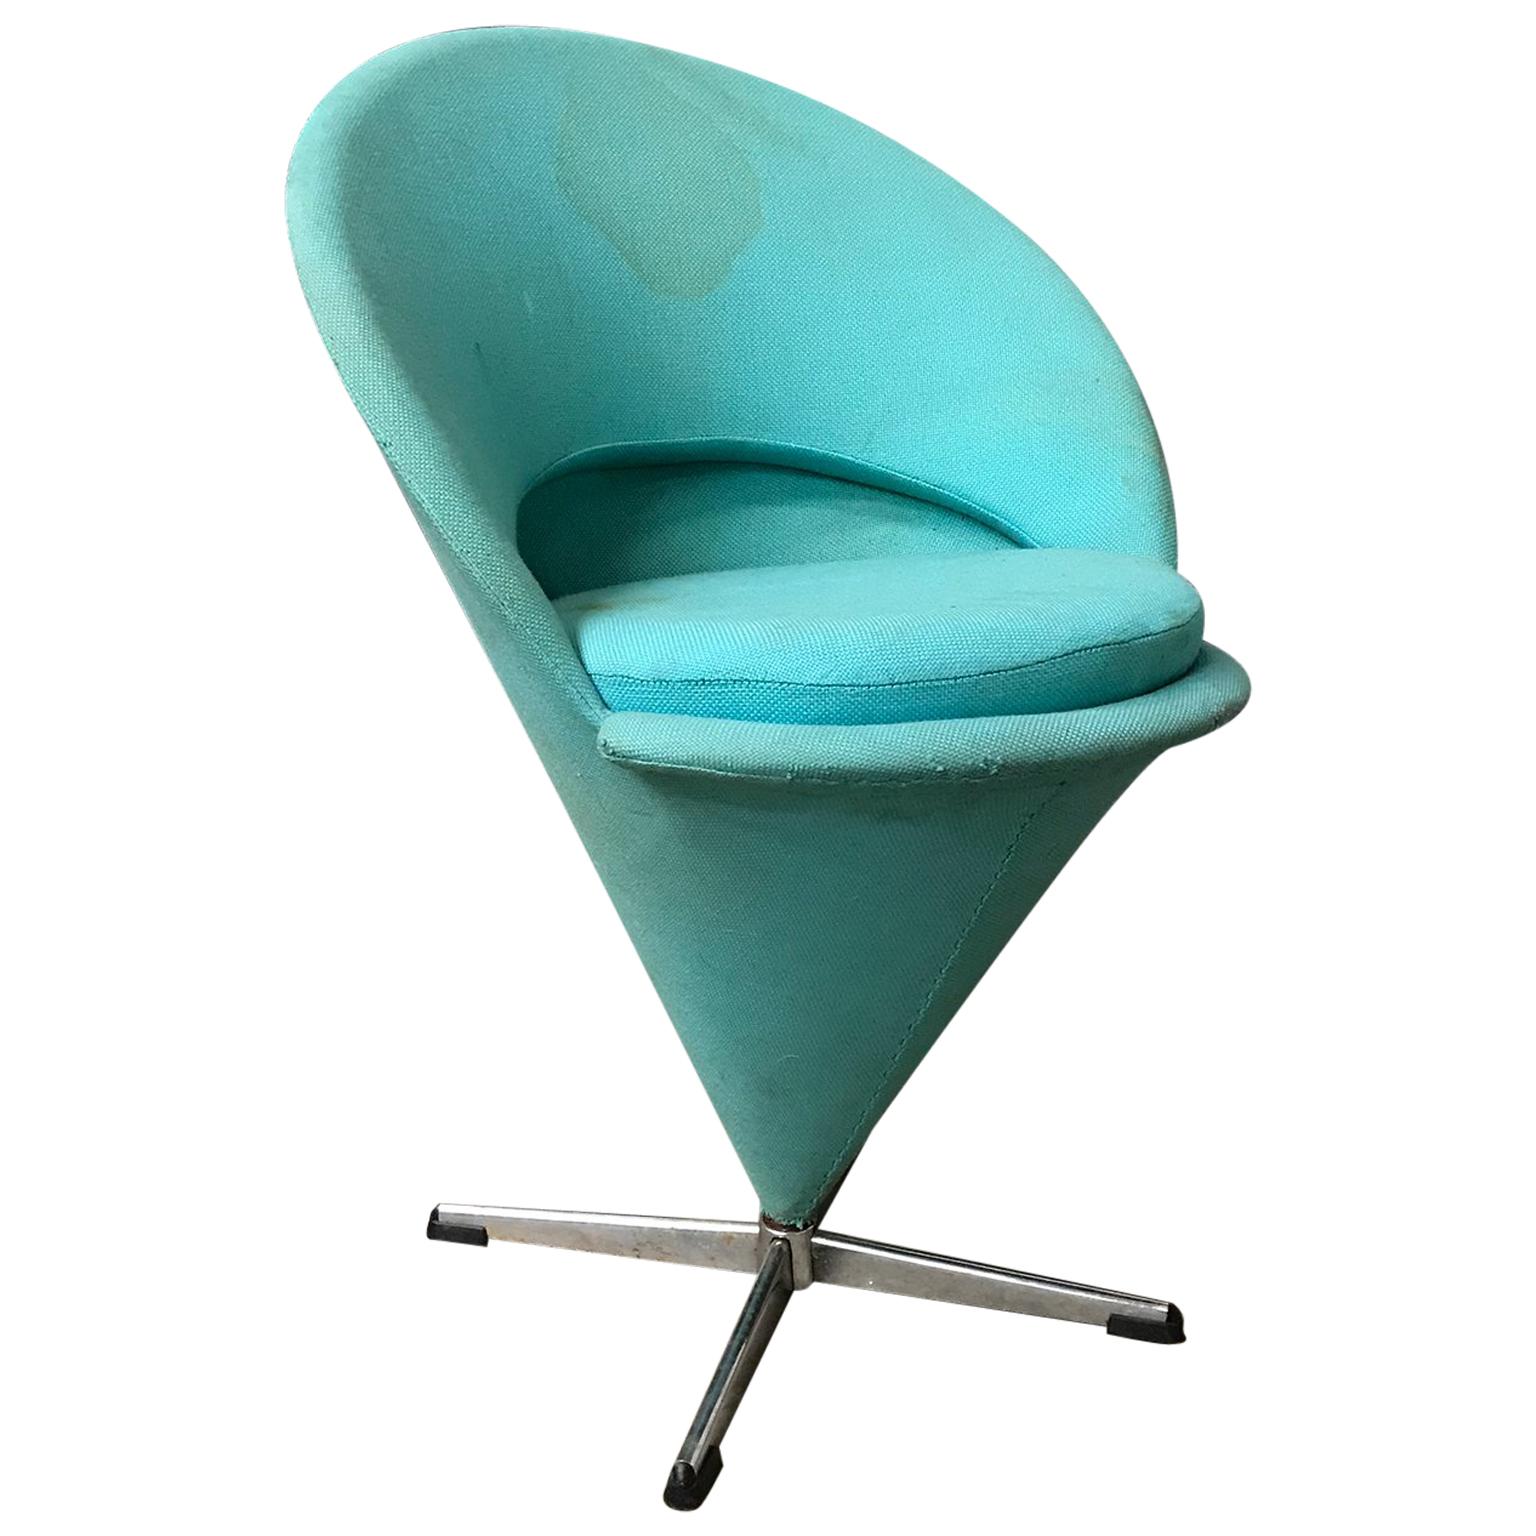 1958, Verner Panton for Rosenthal, Cone Chair in Original Turquoise Fabric